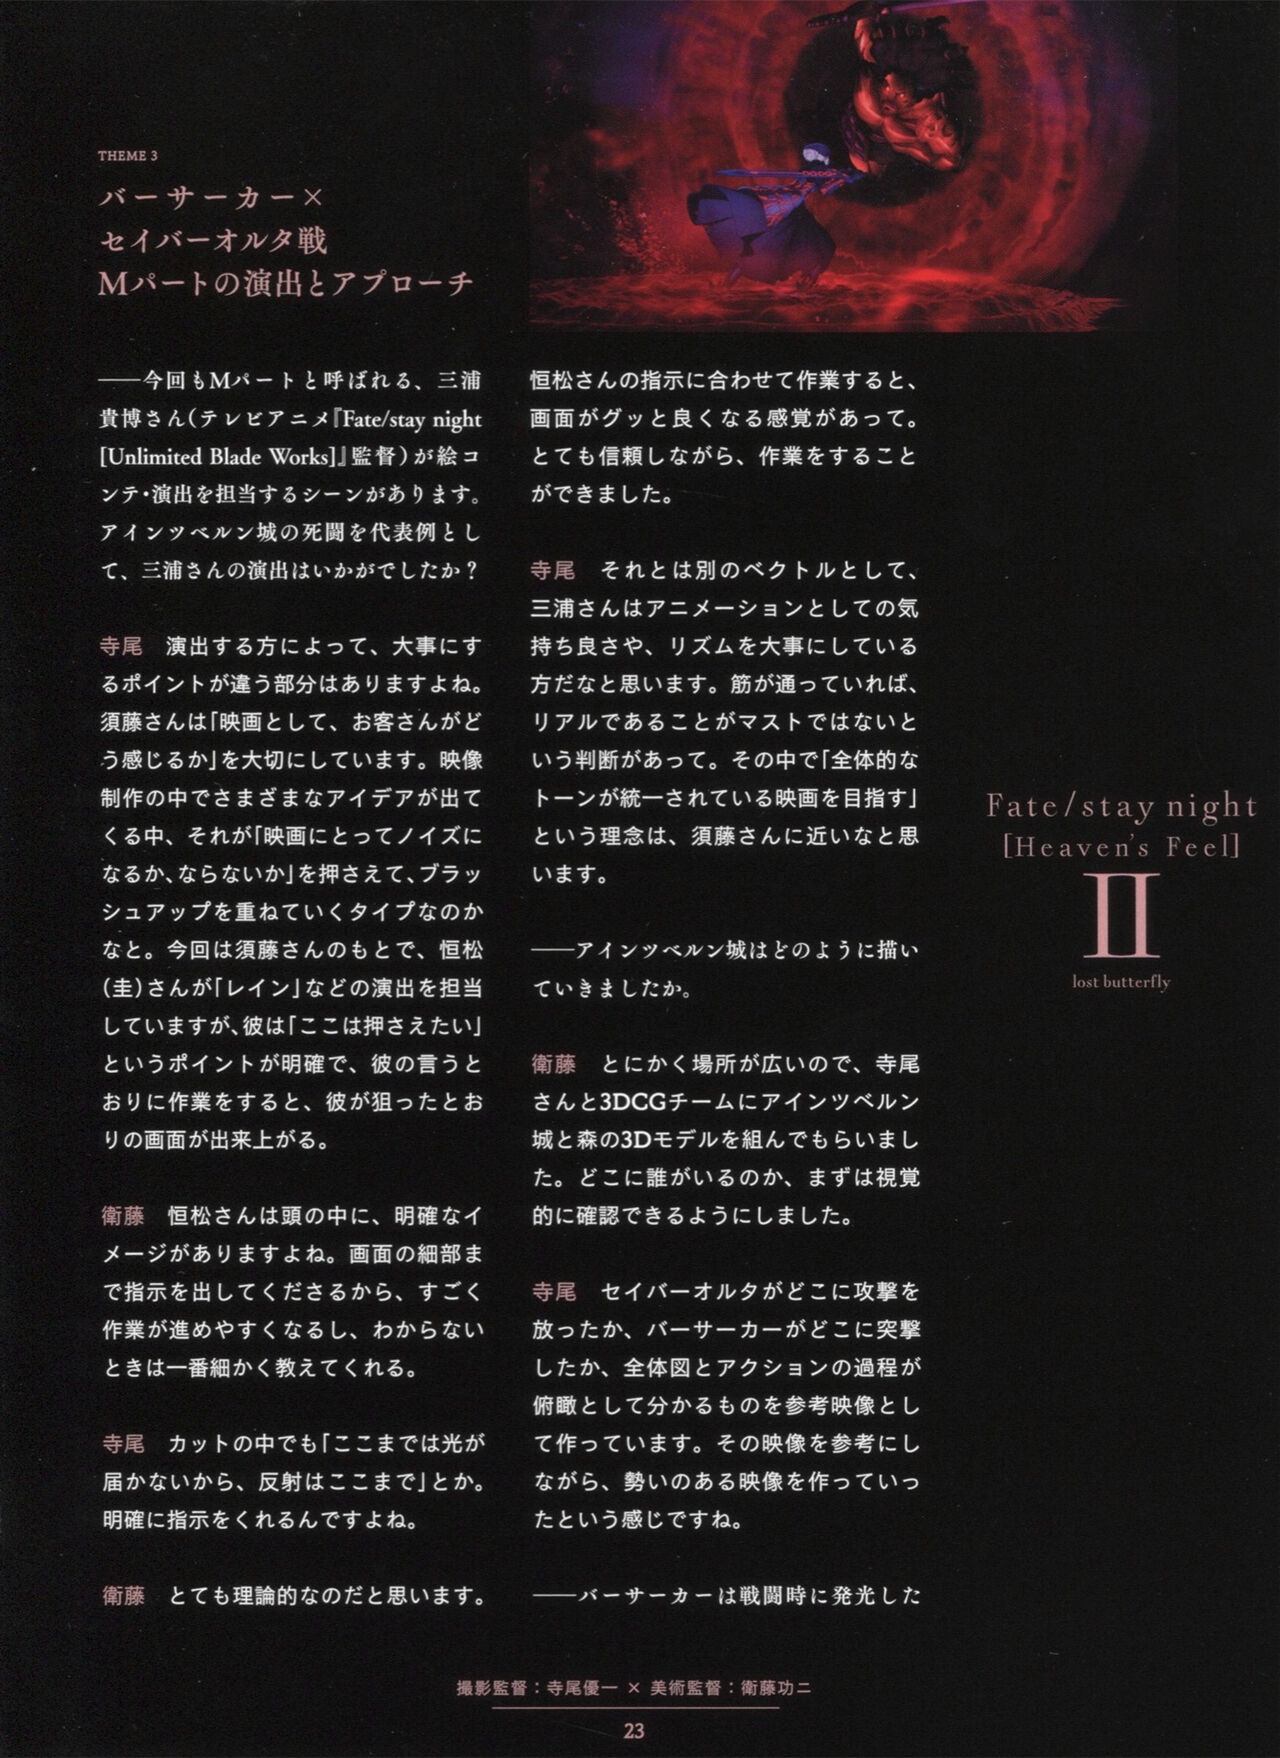 Fate/Stay Night: Heaven's Feel II - Lost Butterfly Animation Material 22